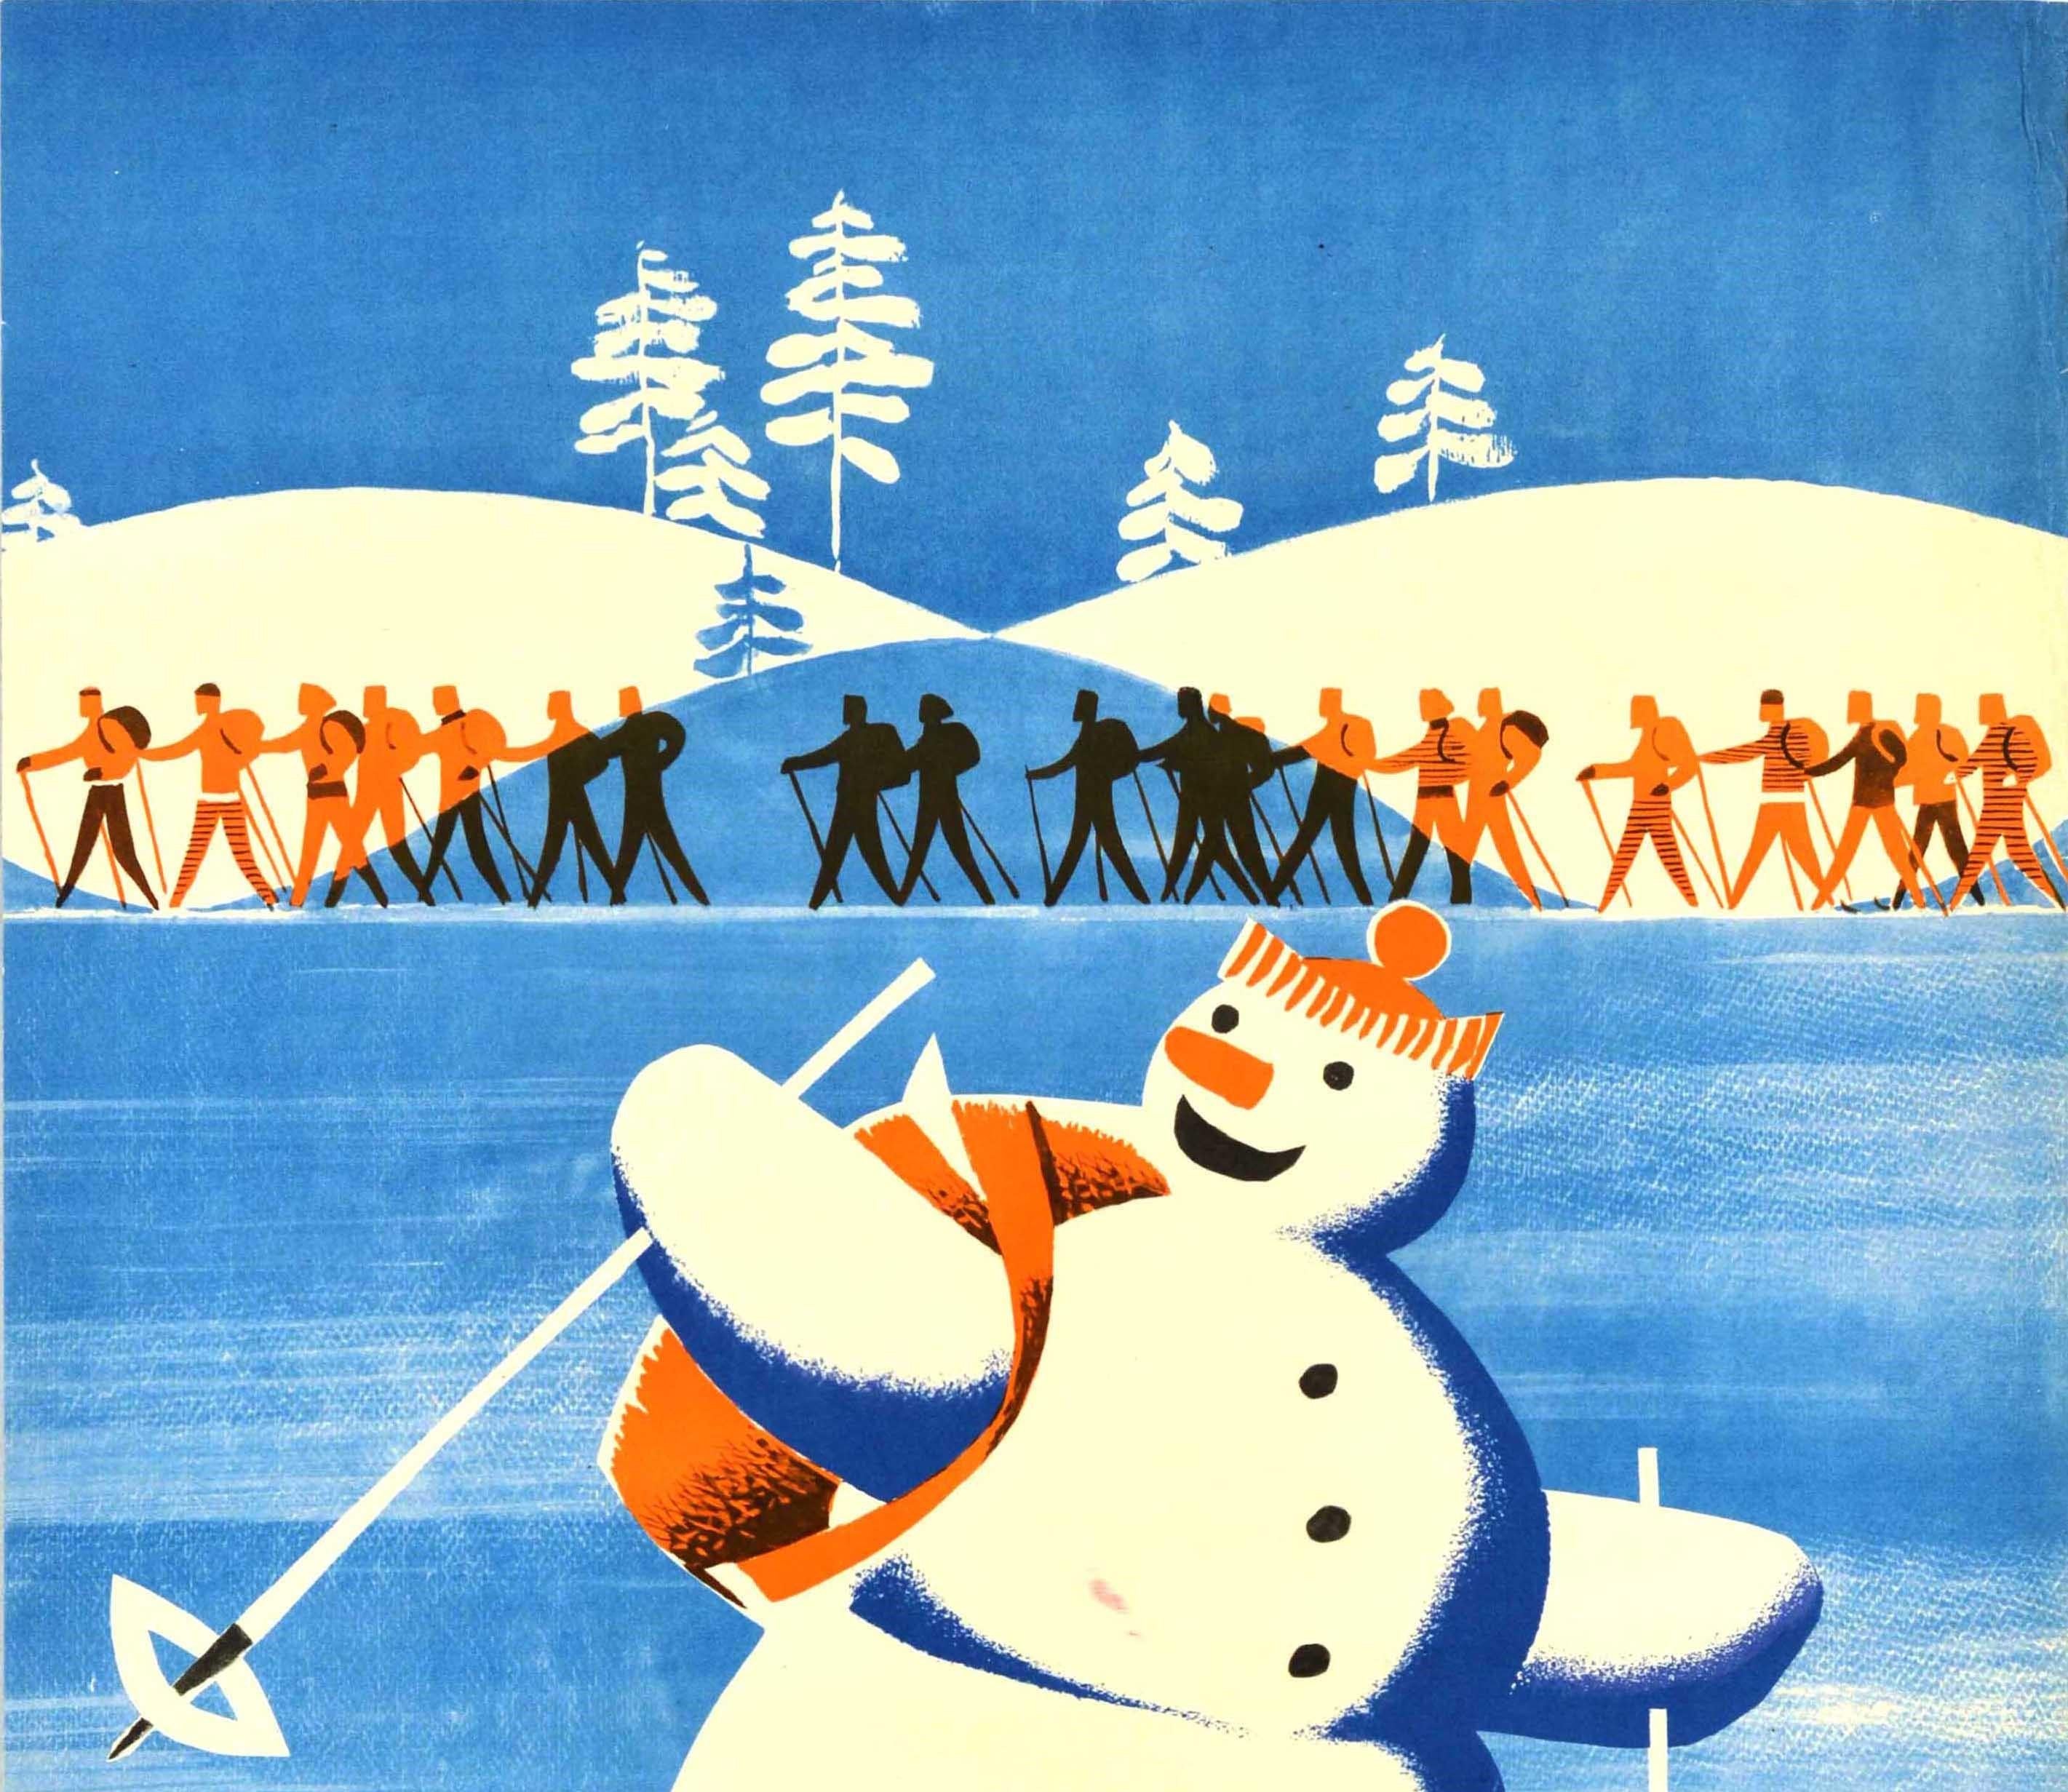 Original Vintage Winter Sport Poster Ski Tourists Snowman Cross-Country Skiers In Good Condition For Sale In London, GB